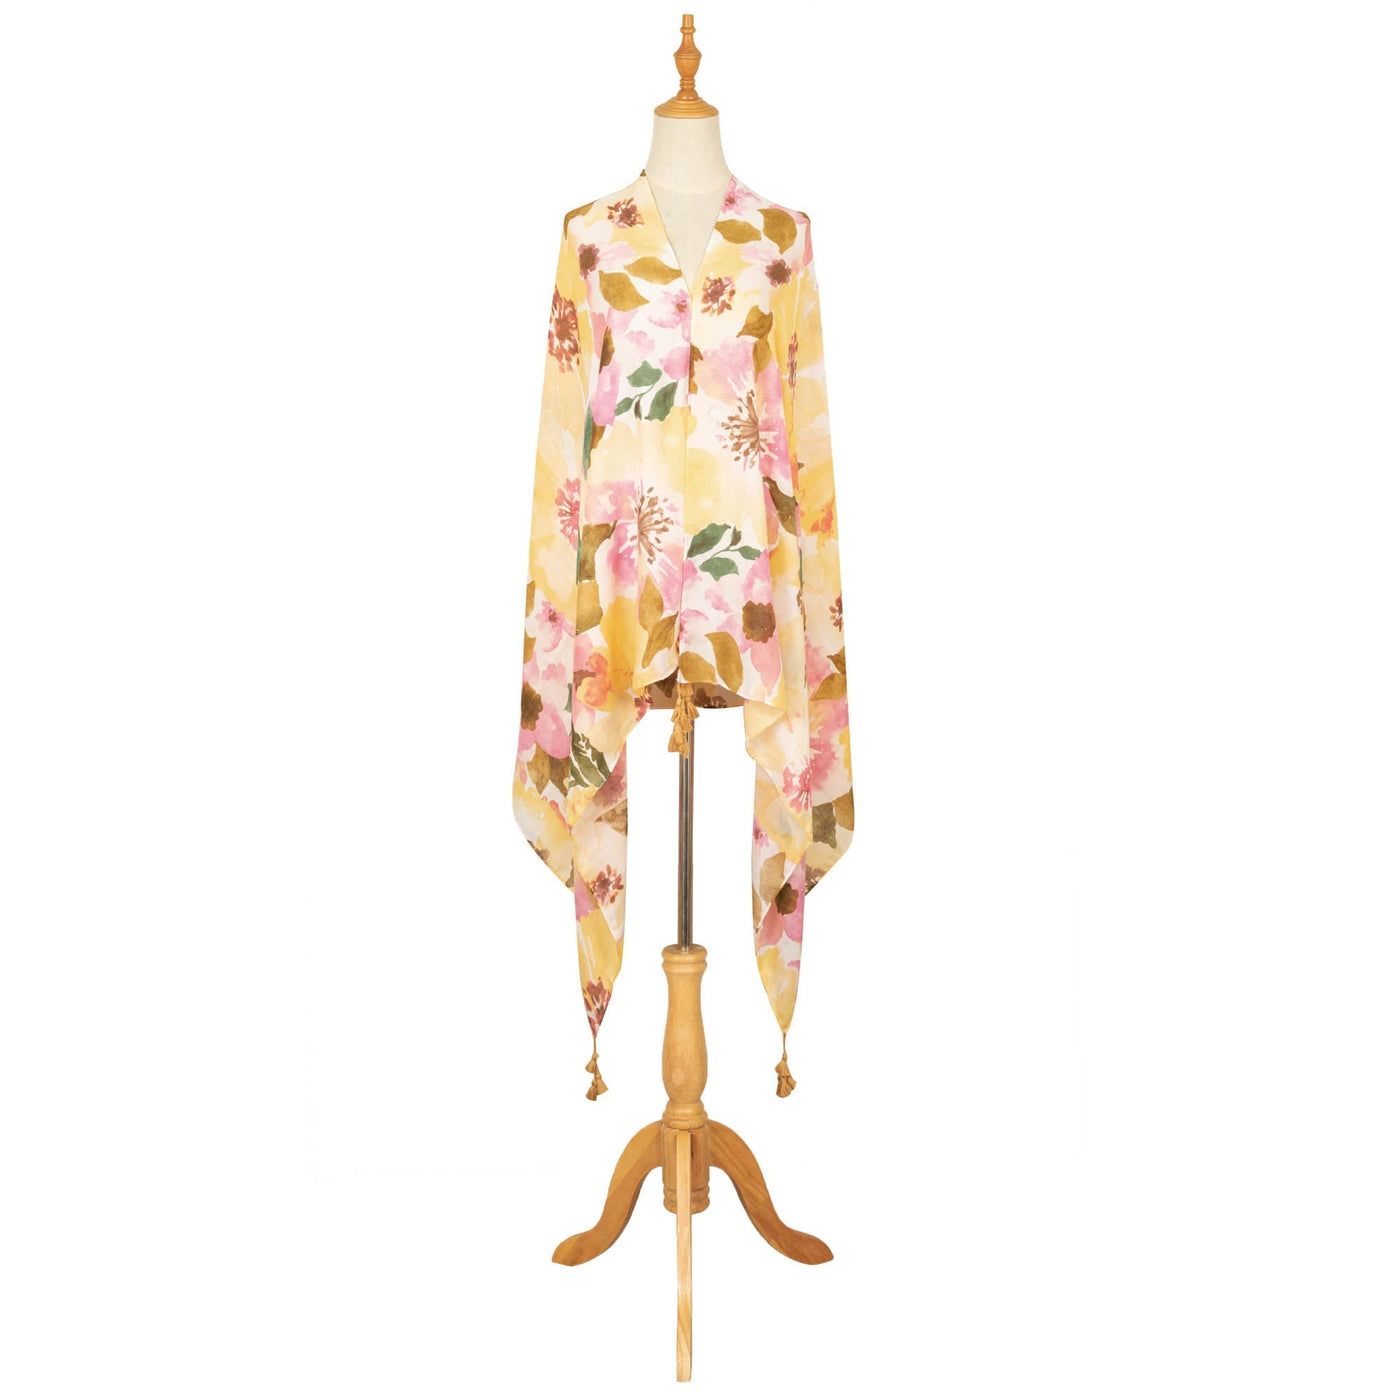 SCARF - Soak Up The Sun - Light Weight Woven Abstract Floral Scarf